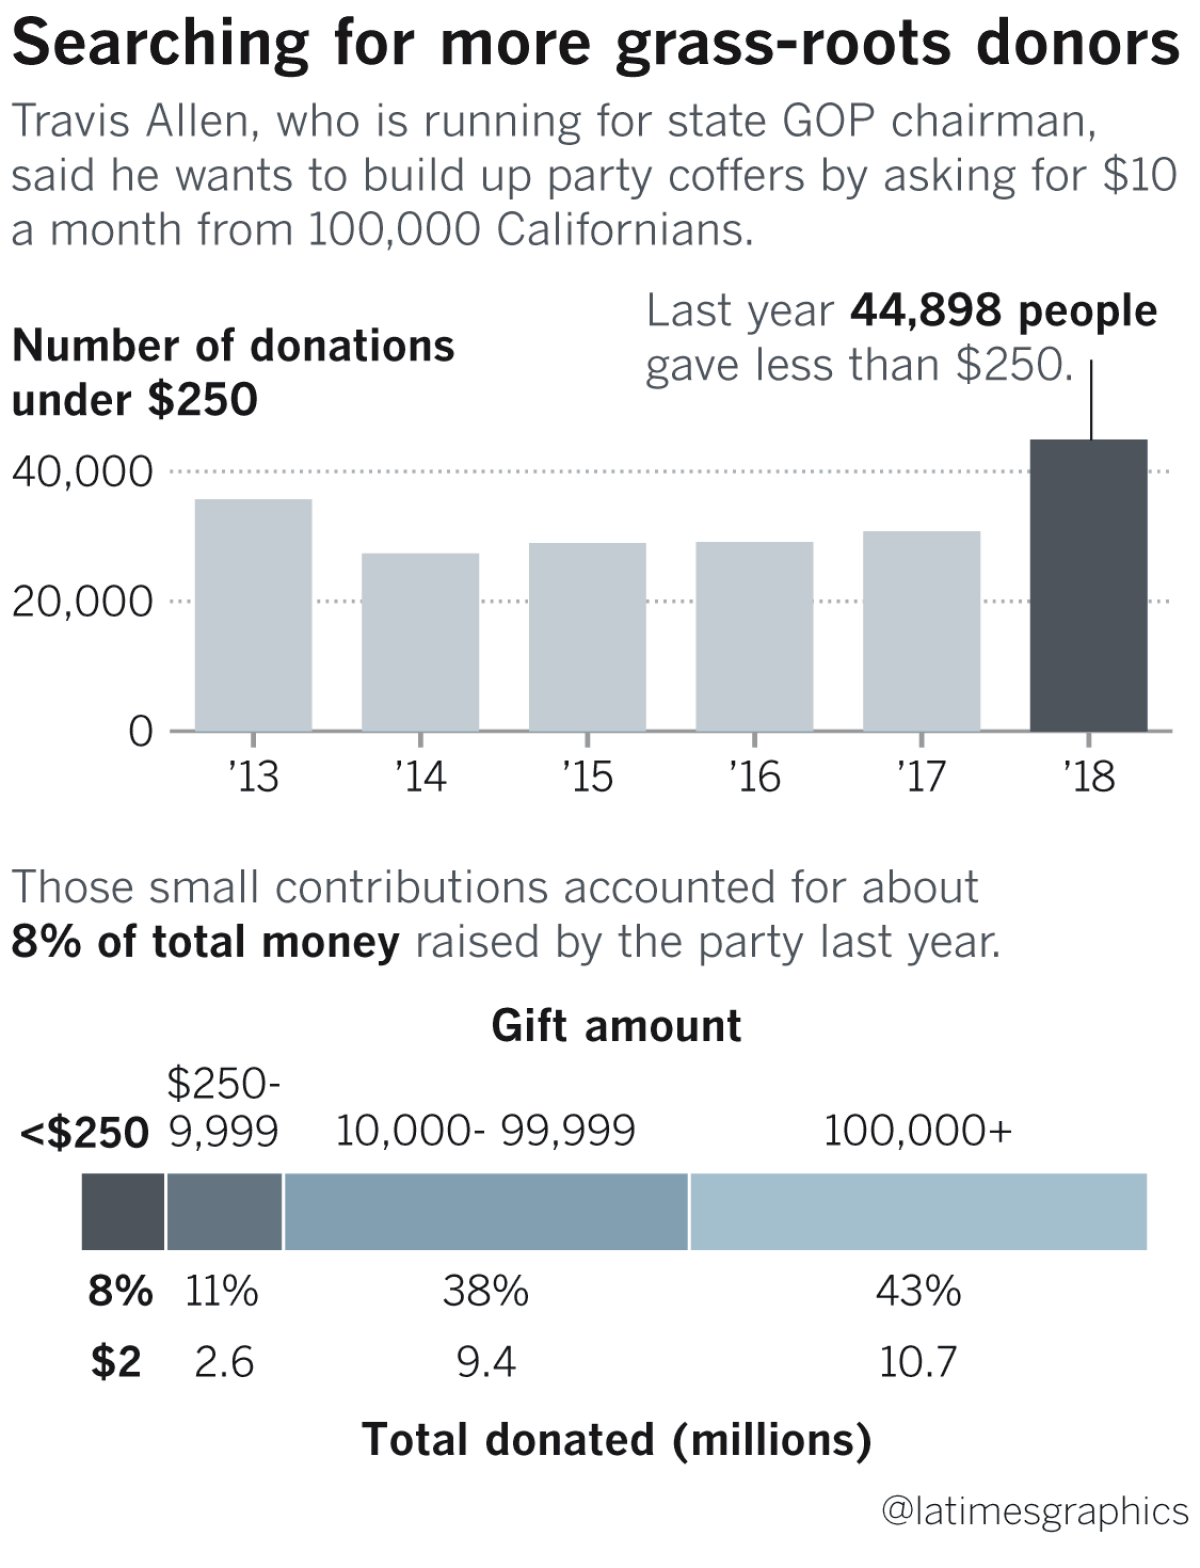 Source: California Republican Party data obtained by The Times